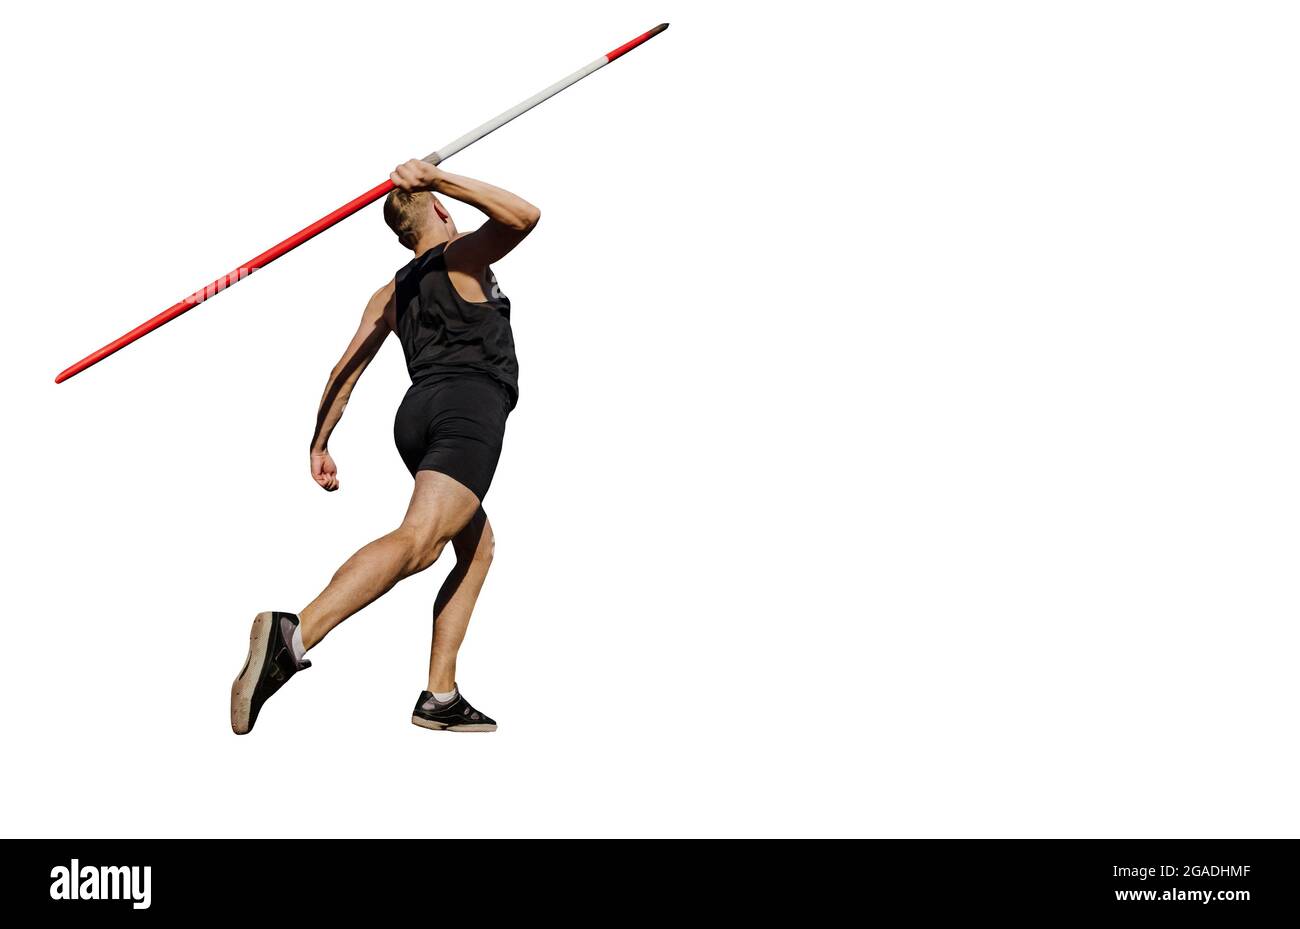 male thrower javelin throw isolated on white background Stock Photo